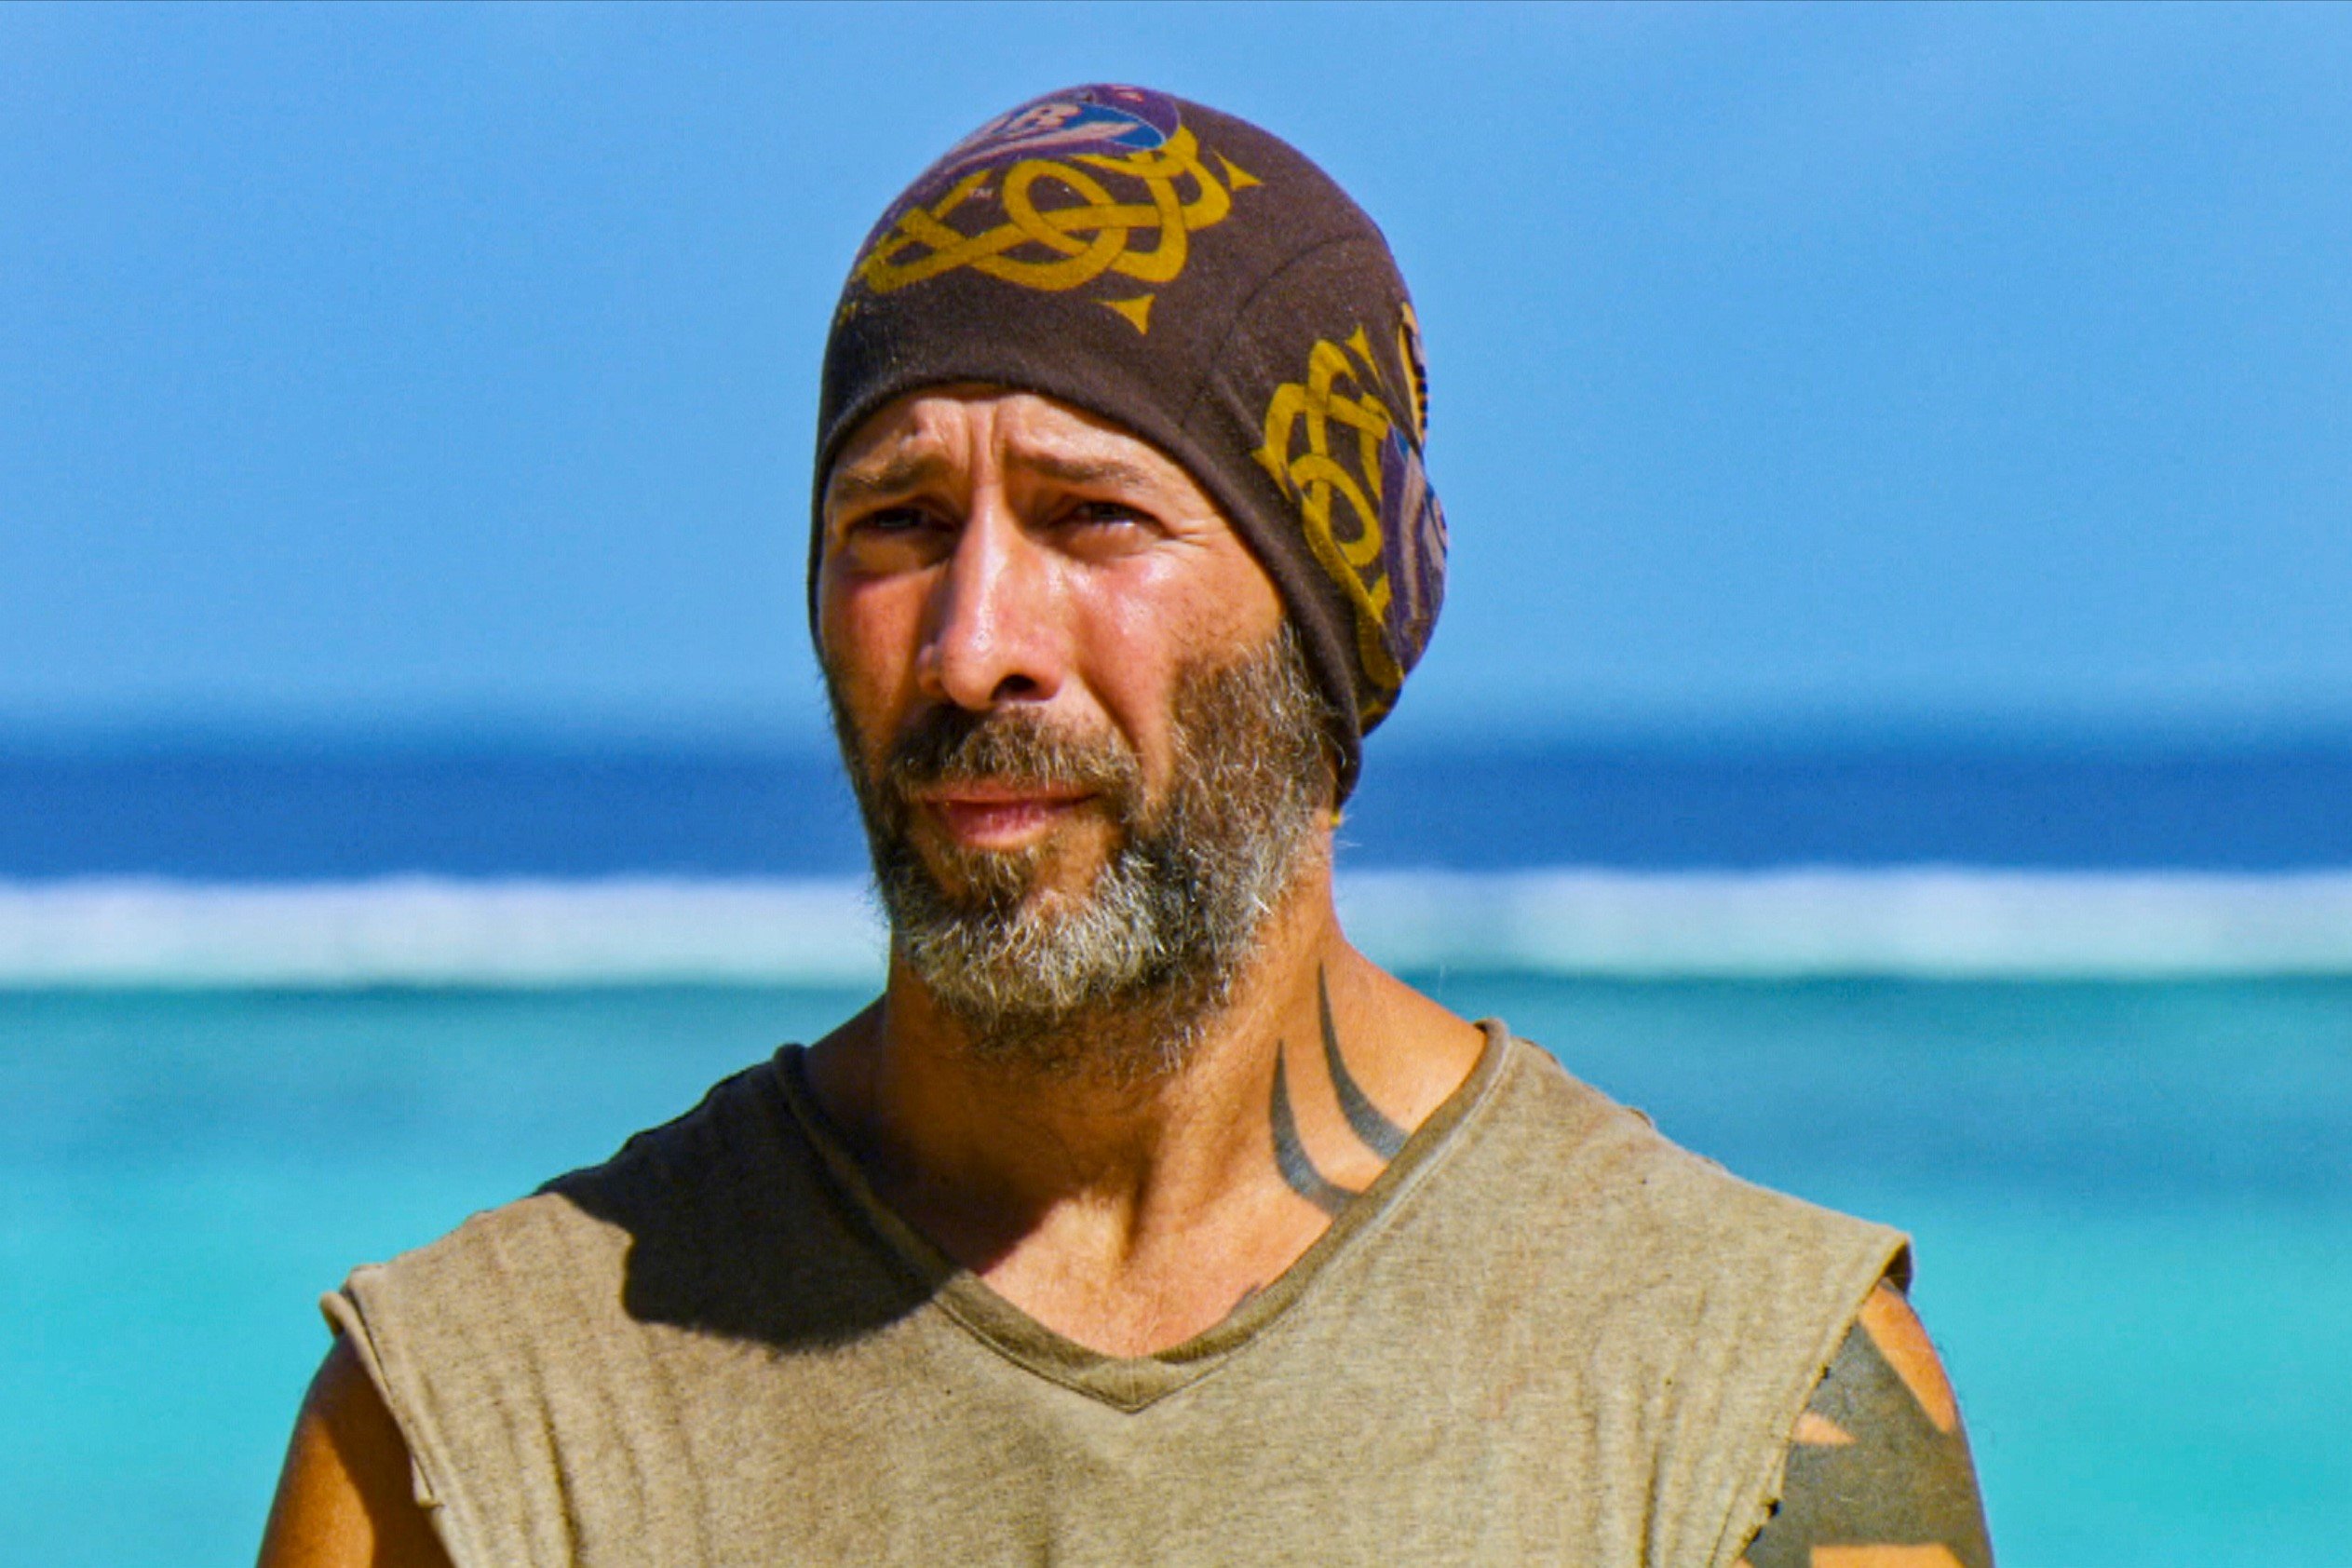 Tony Vlachos, who is a two-time 'Survivor' winner, wears a sleeveless gray shirt and brown and gold 'Survivor: Winners at War' buff.